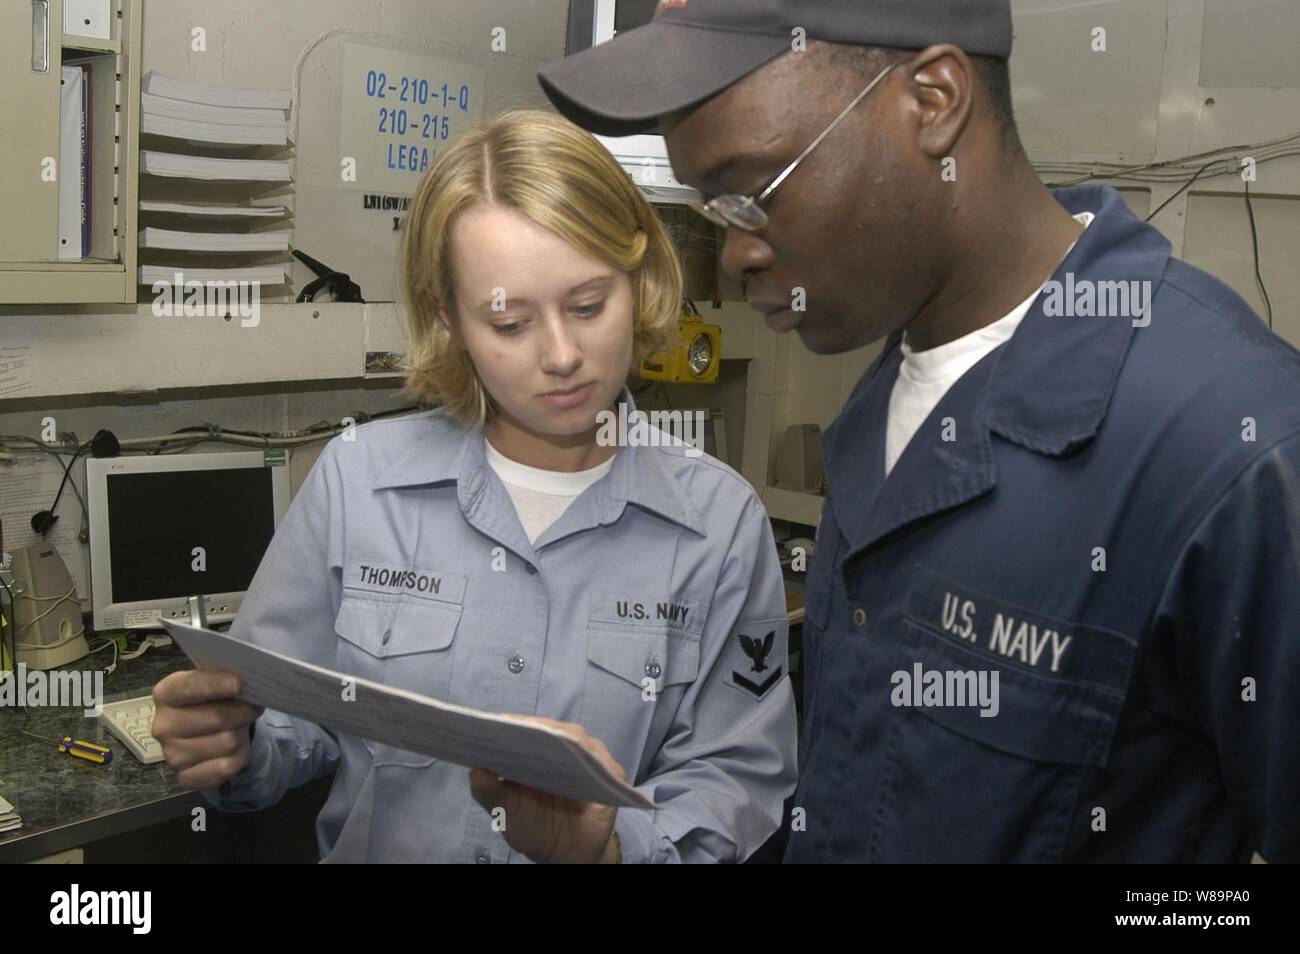 Petty Officer 3rd class Candie Thompson (left), from the USS Kitty Hawk (CV 63) legal assistance office, assists Fireman Paul Byrd in filling out an absentee ballot on Oct. 13, 2004.  Absentee ballots help ensure that all military members stationed overseas are given the opportunity to vote.  Byrd serves aboard the Kitty Hawk as a hull maintenance technician. Stock Photo